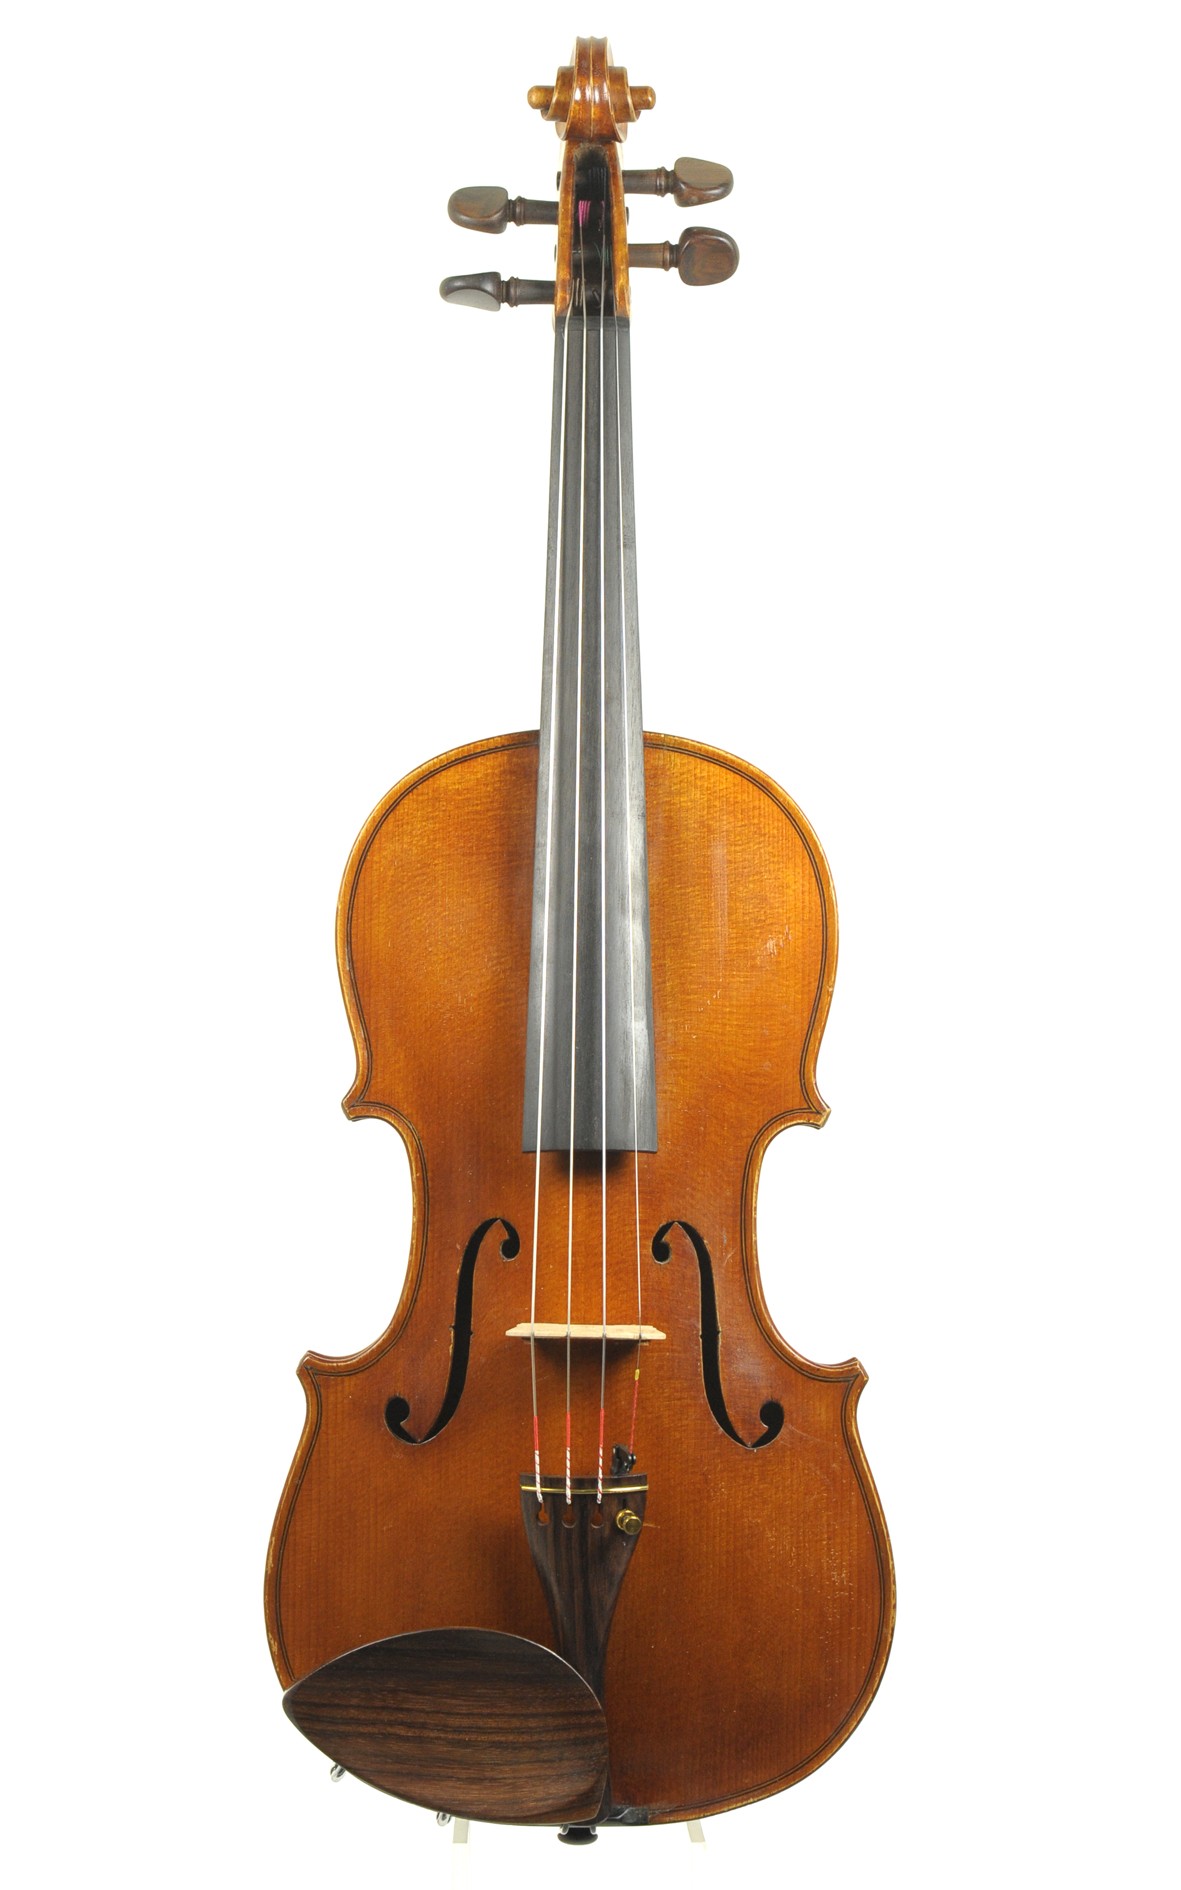 US-American violin by Lincoln Clough, 1925 - widely grained spruce top